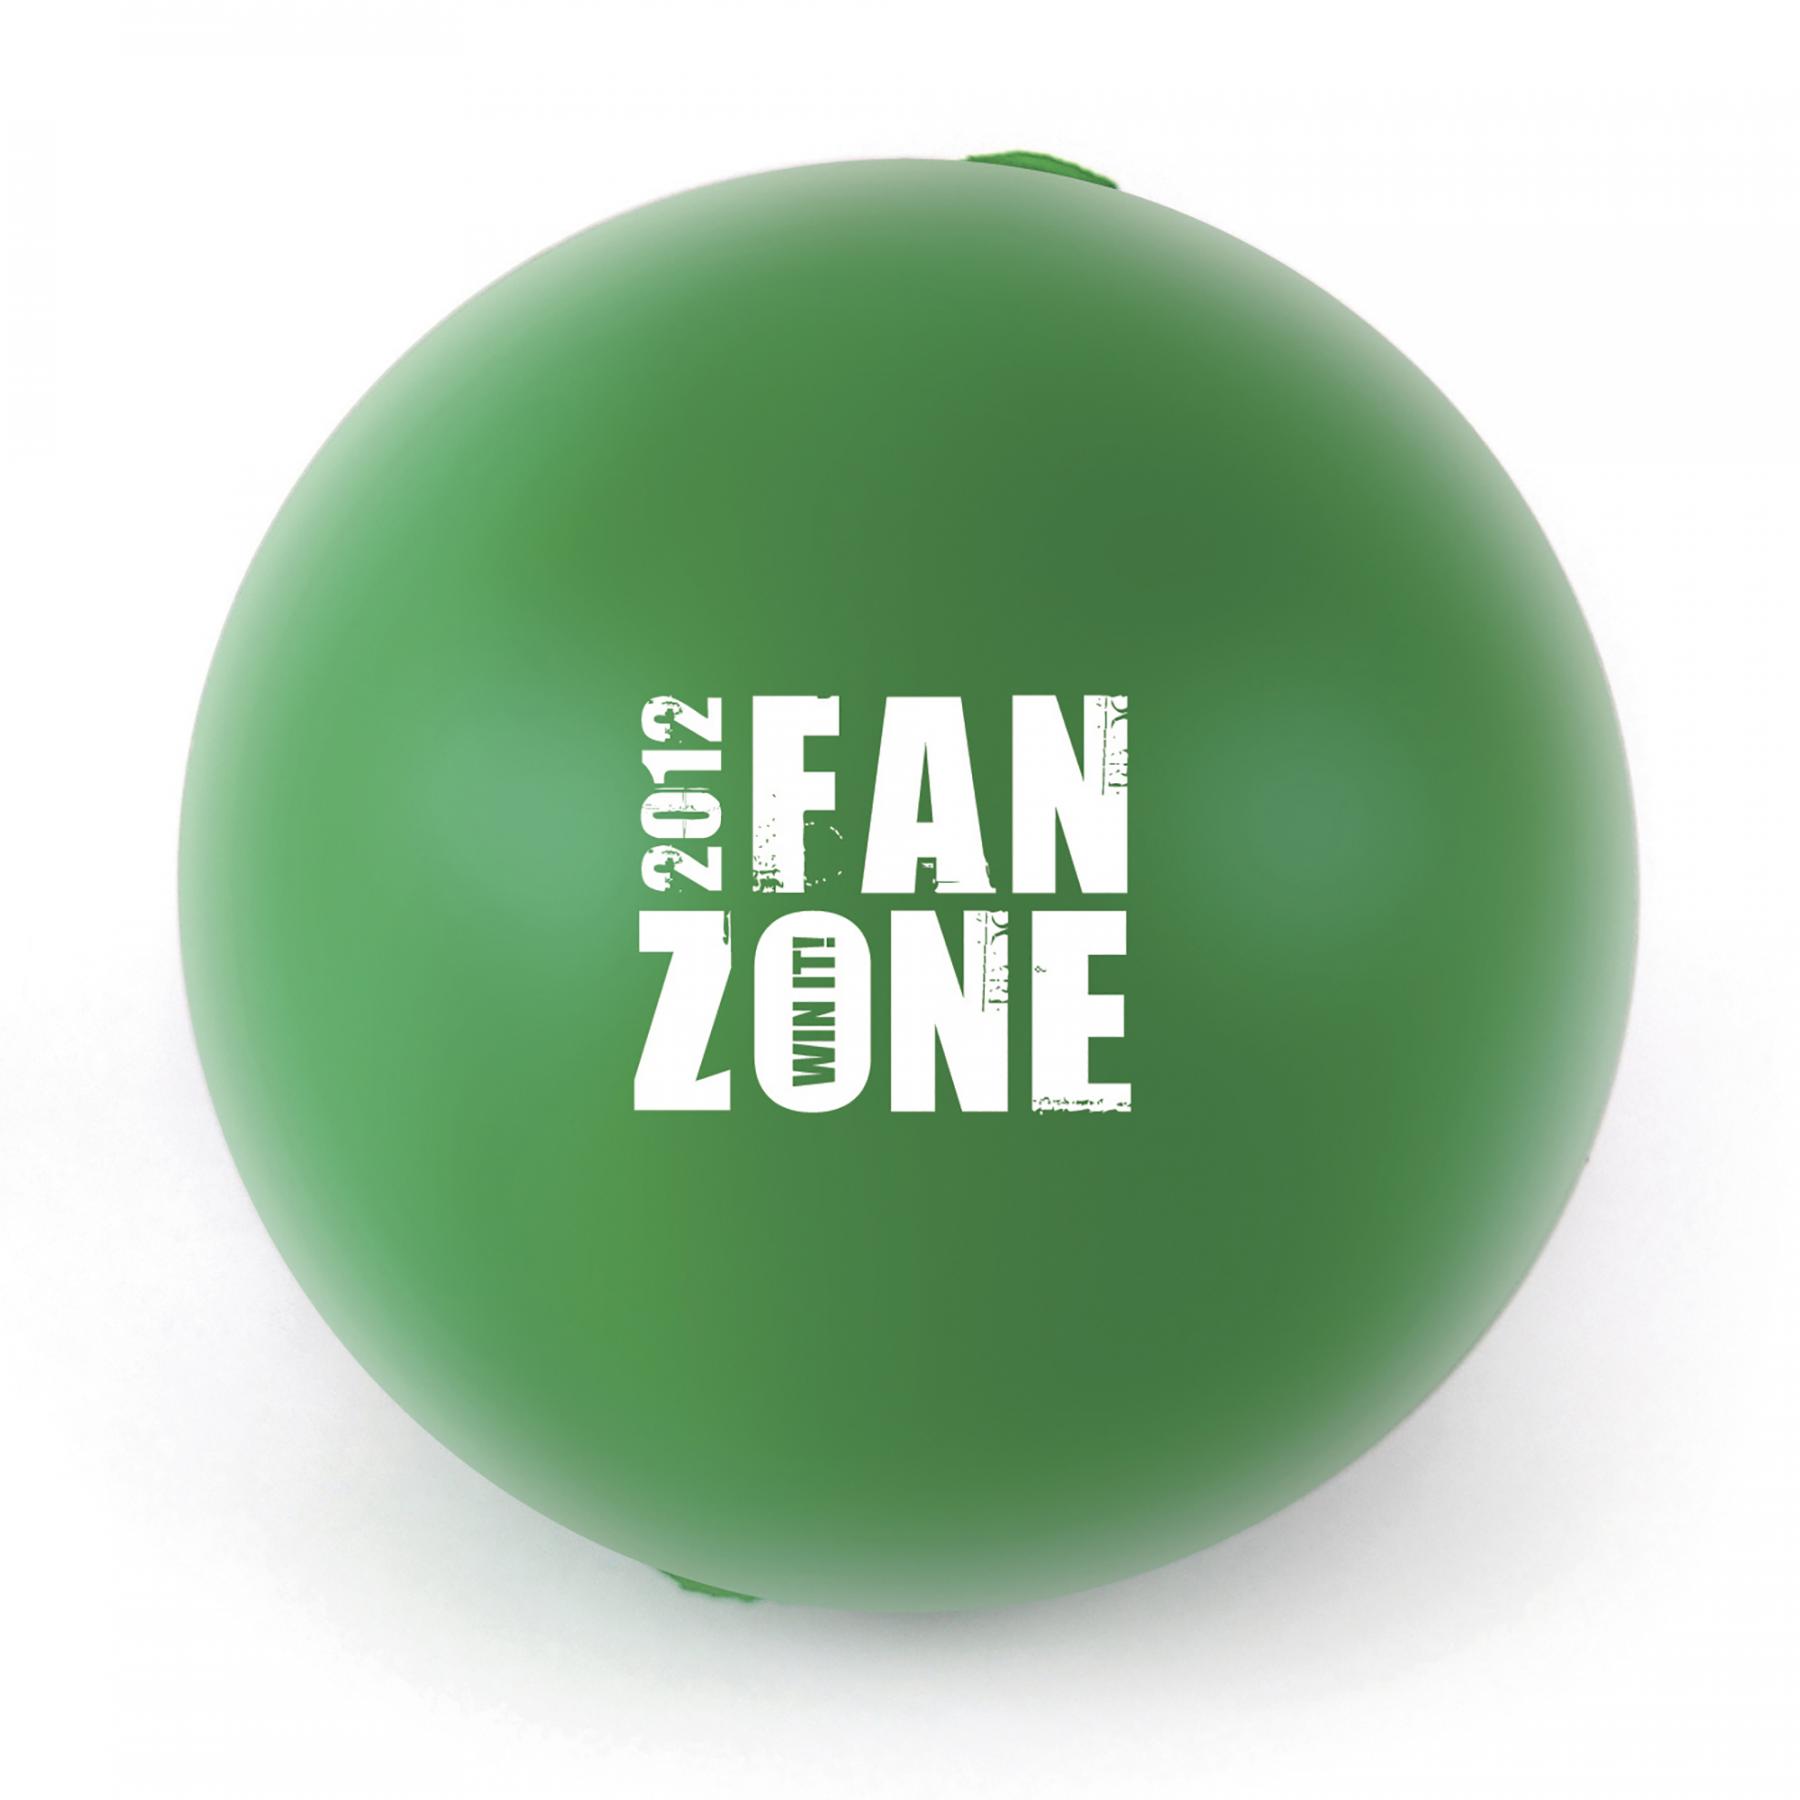 60mm diameter stress ball. Available in various colours